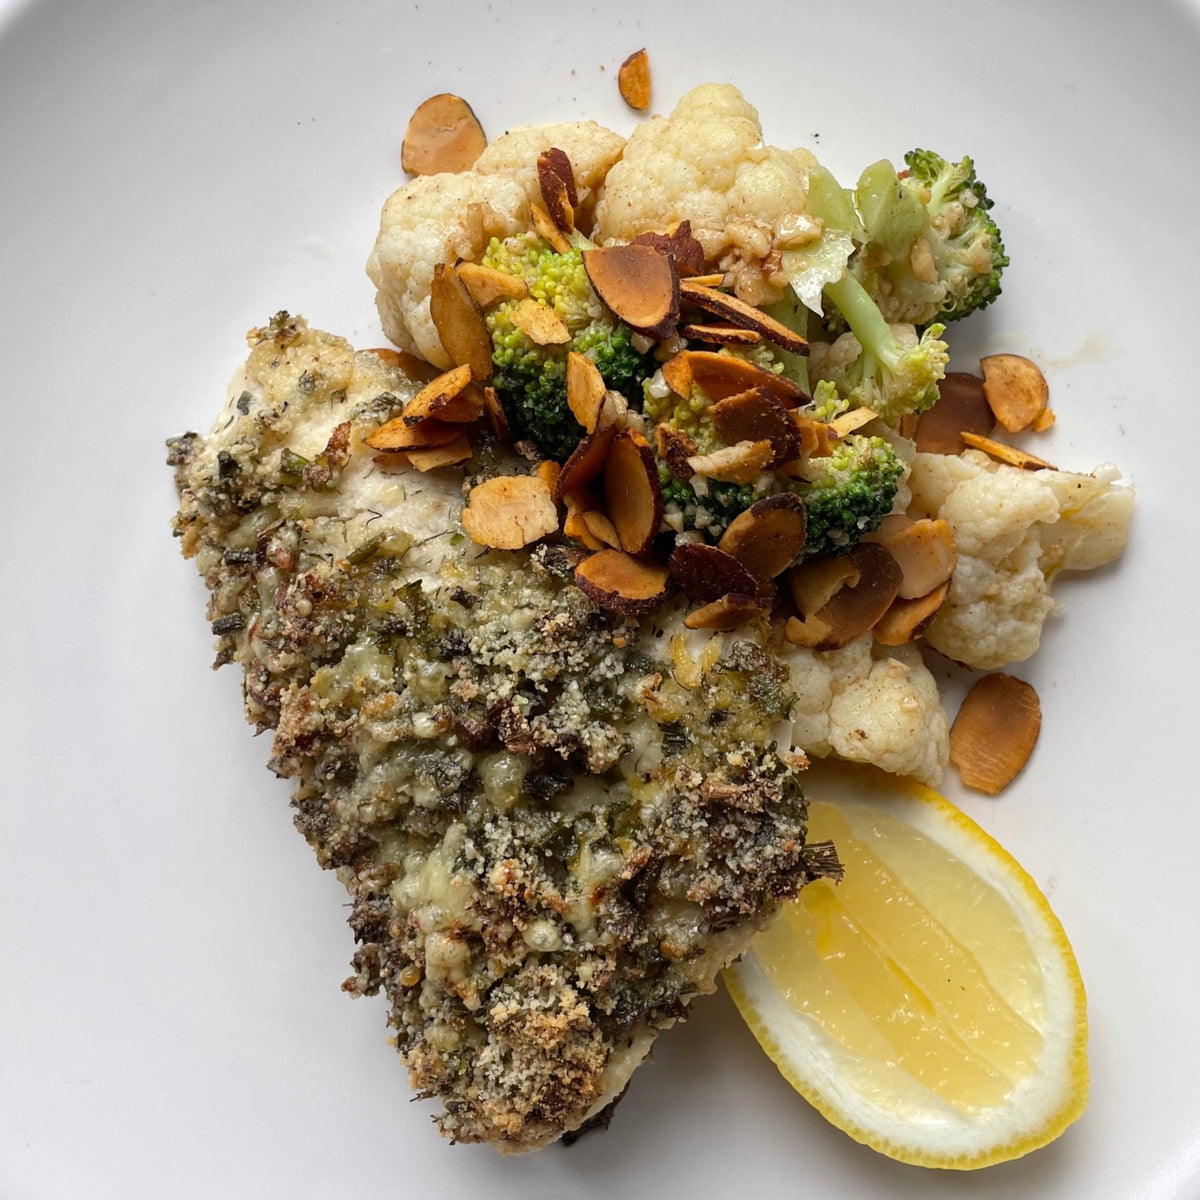 Zingy Lemon Fish with Steamed Vegetables, Garlic Butter and Spiced Almonds